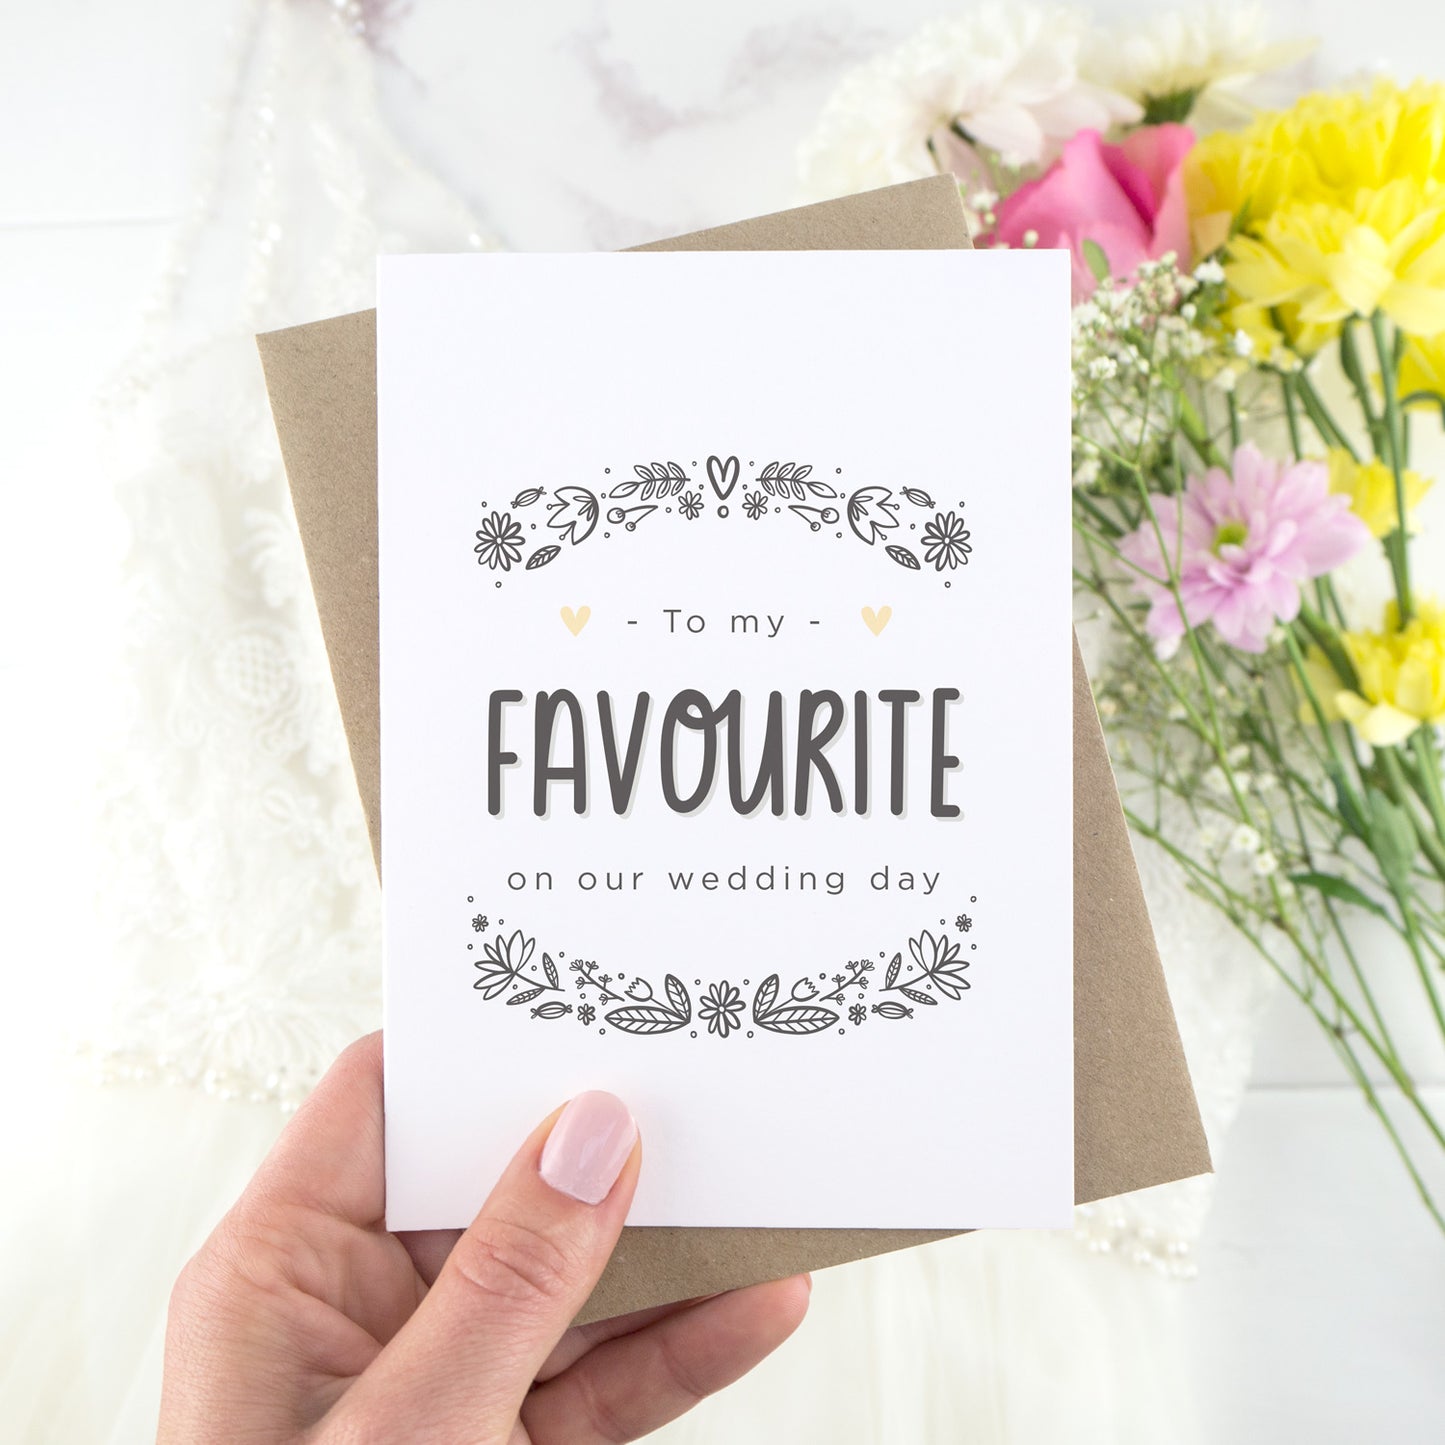 To my favourite on our wedding day. A white card with grey hand drawn lettering, and a grey floral border. The image features a wedding dress and bouquet of flowers.